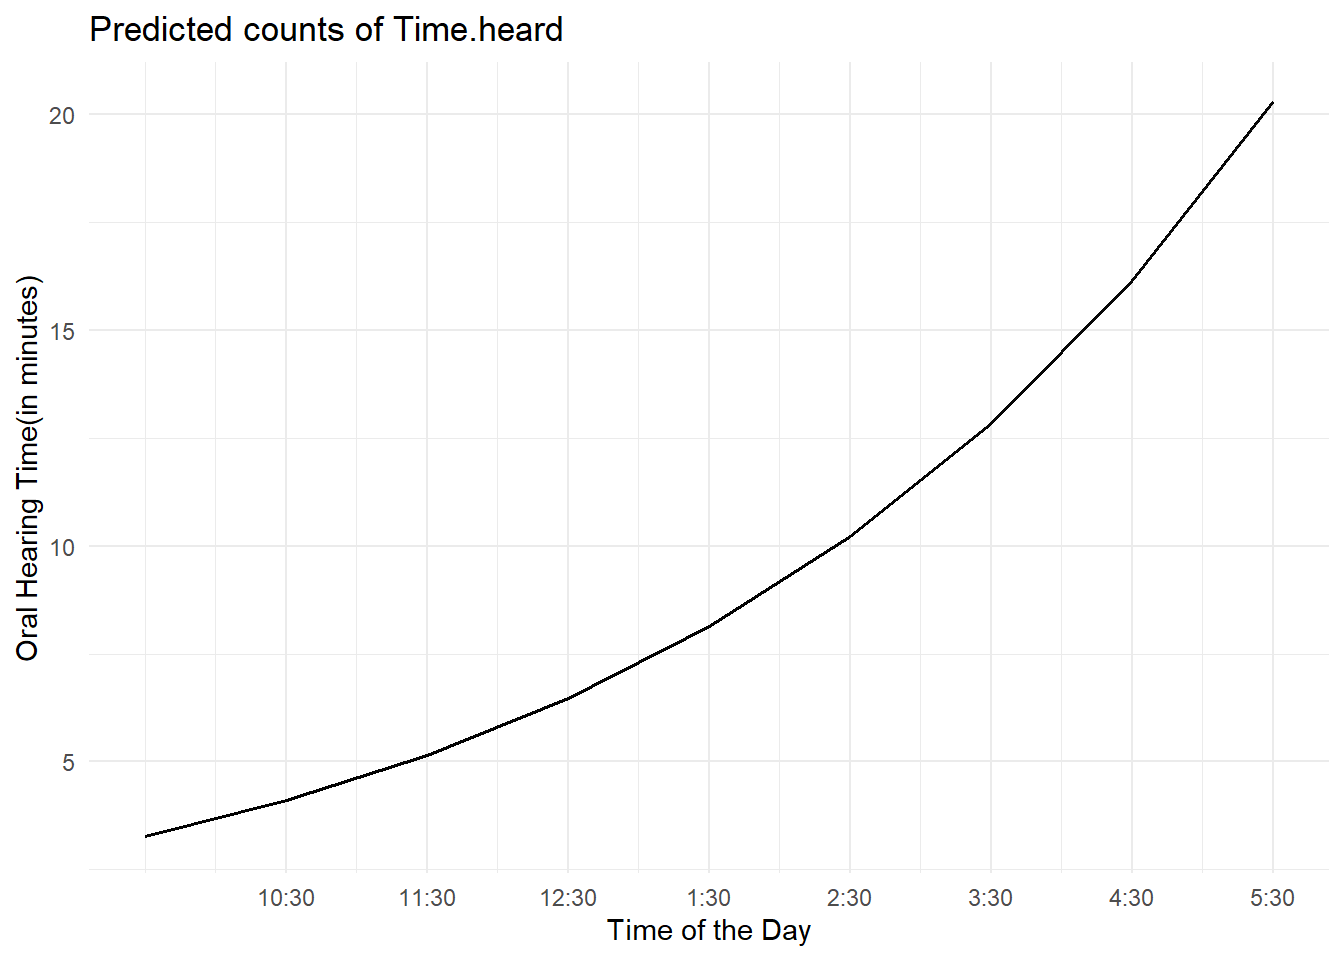 Marginal Effect of Time of the Day on Hearing Time